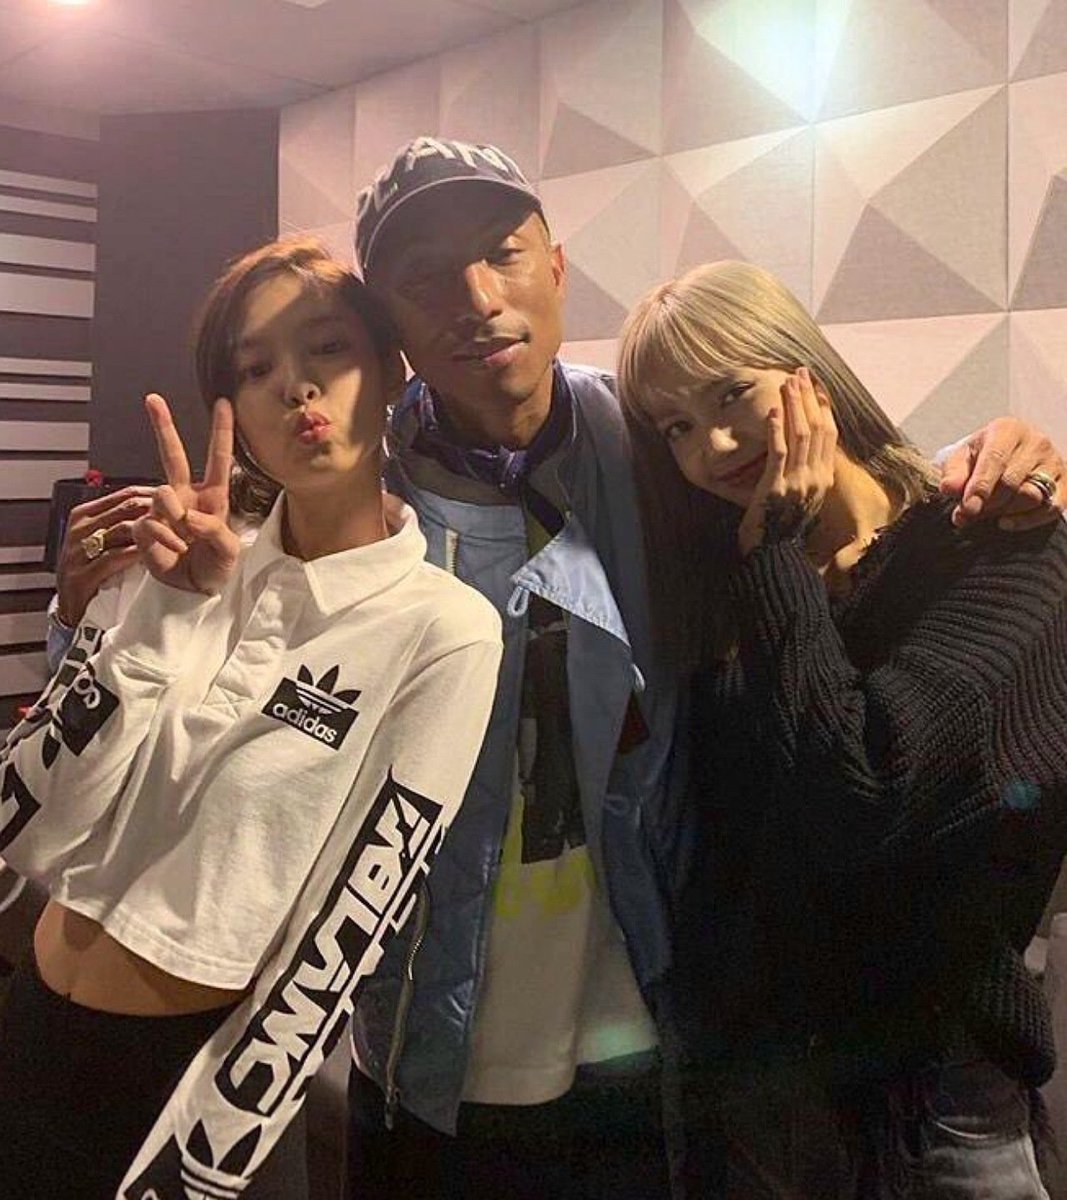 While he was in Korea for his Chanel event, Pharrell Williams spent some time in the studio with Jennie and Lisa. Nothing ever came out of it, just another wasted opportunity for new music.